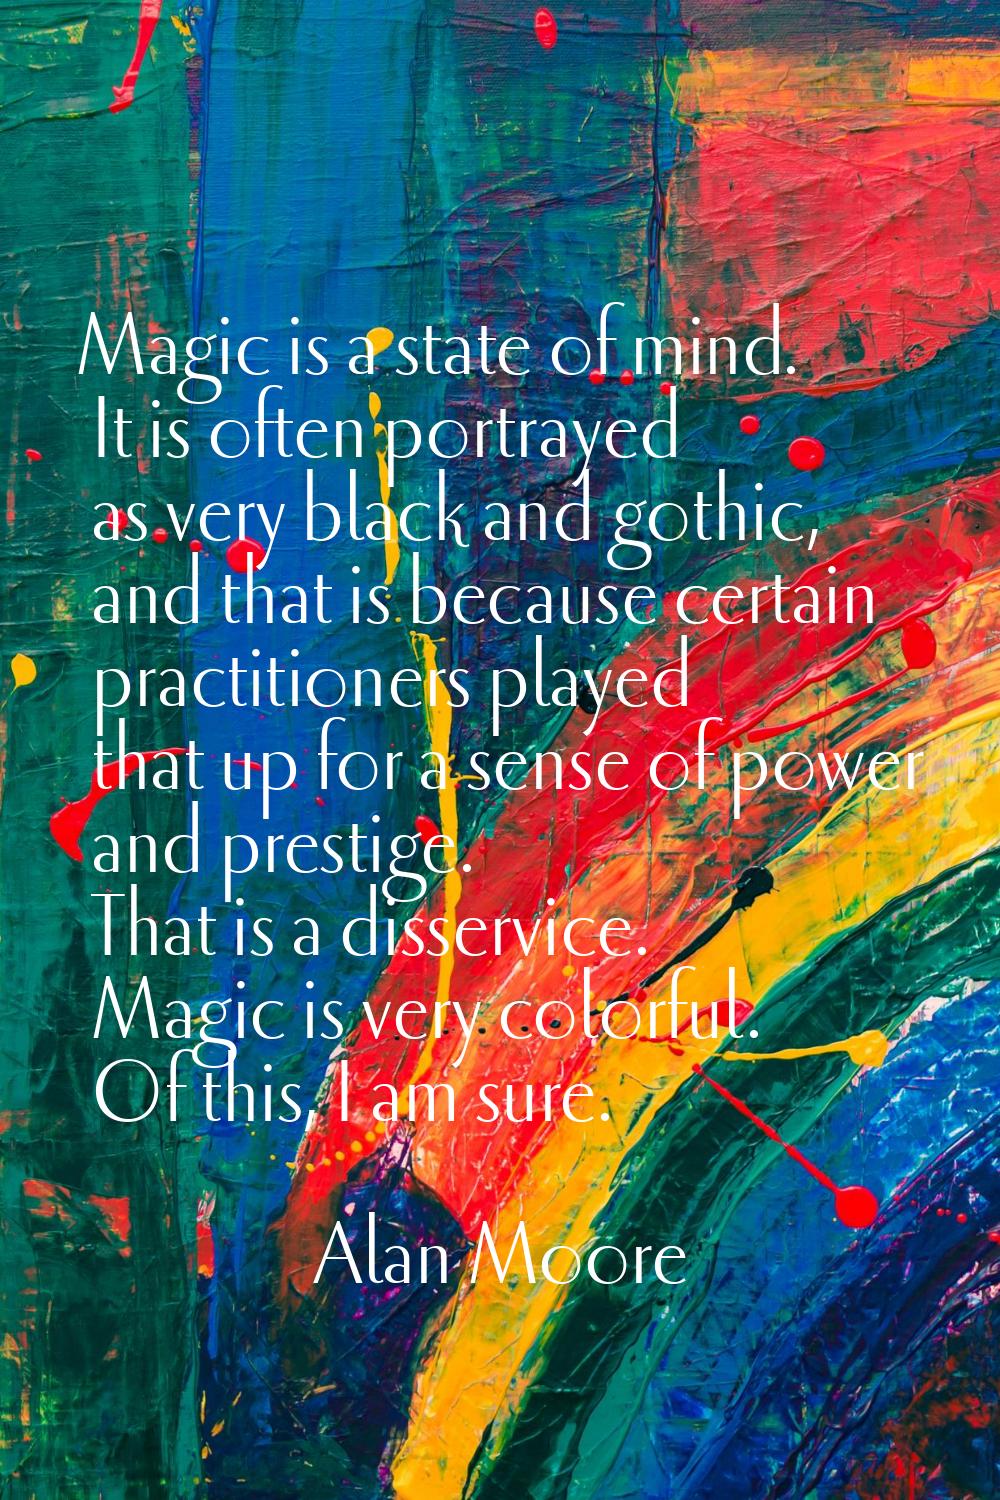 Magic is a state of mind. It is often portrayed as very black and gothic, and that is because certa